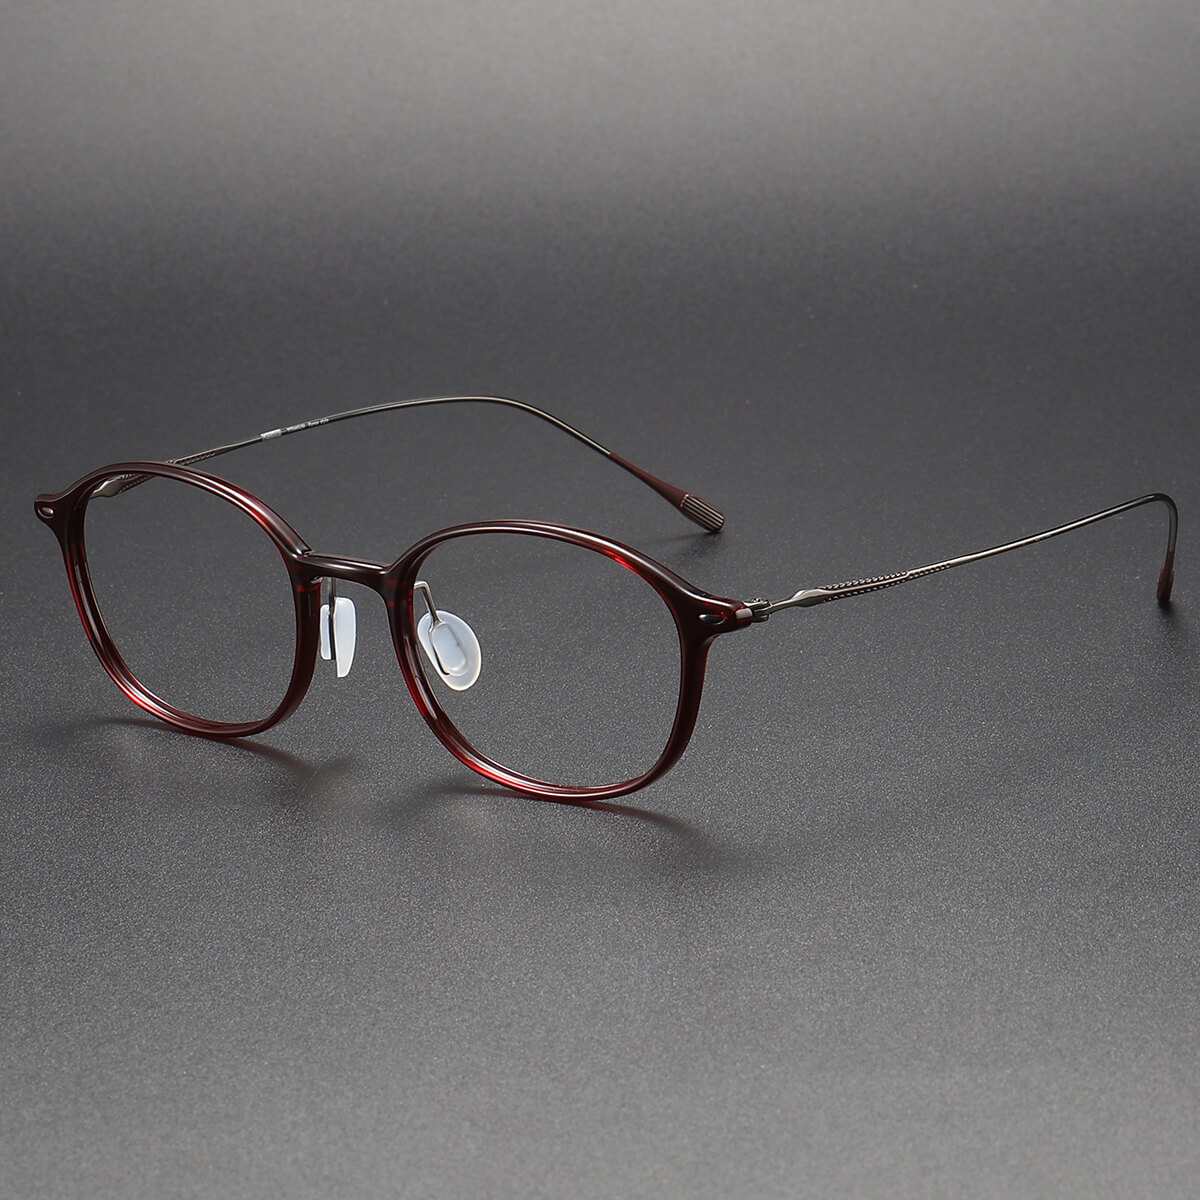 Red Glasses Frames LE1049 - Stylish Titanium for Oval Face Shapes